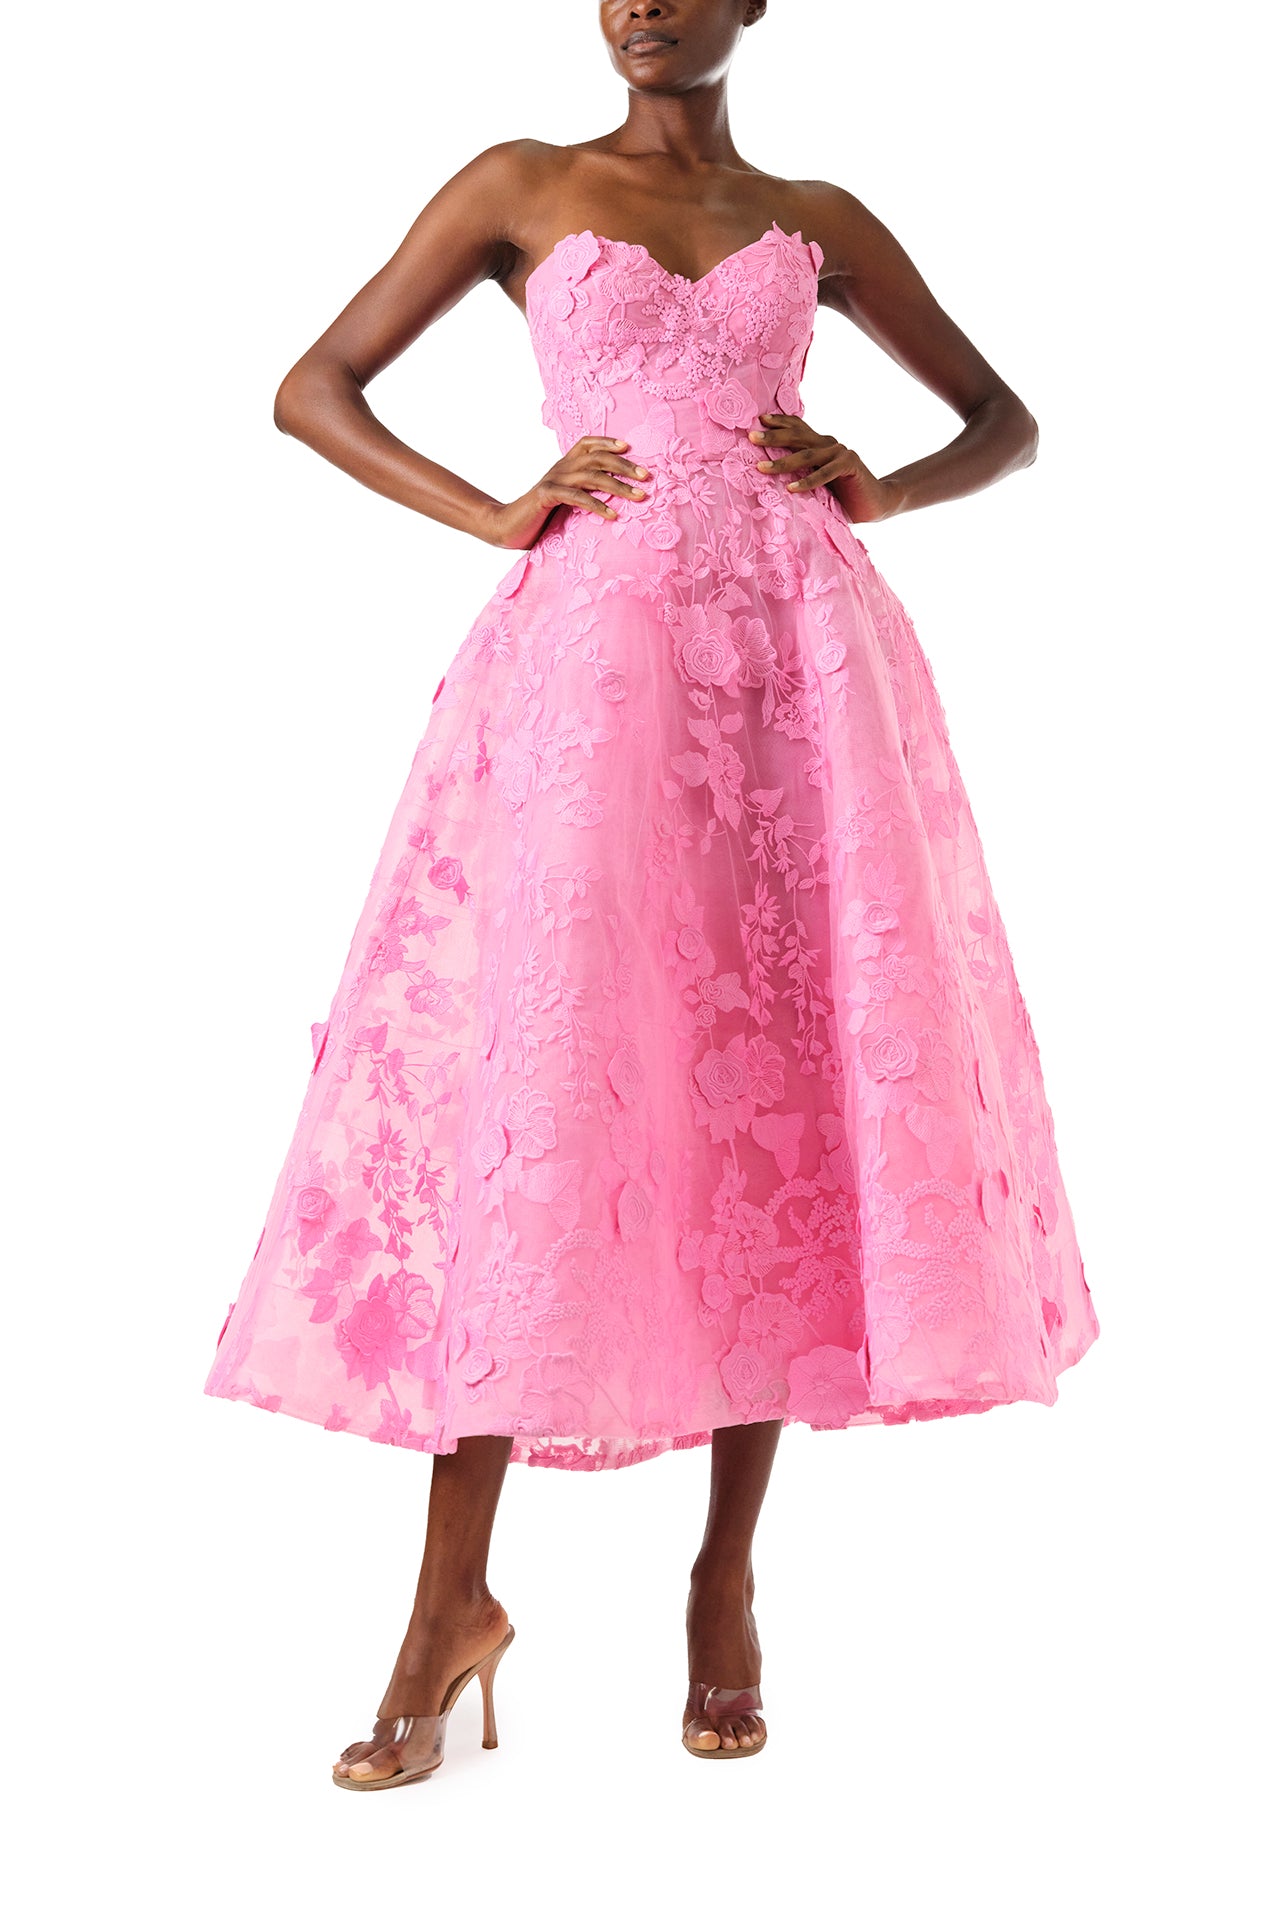 Monique Lhuillier Fall 2024 tea-length, strapless dress in pink 3D lace with full skirt and fitted sweetheart bodice - front two.